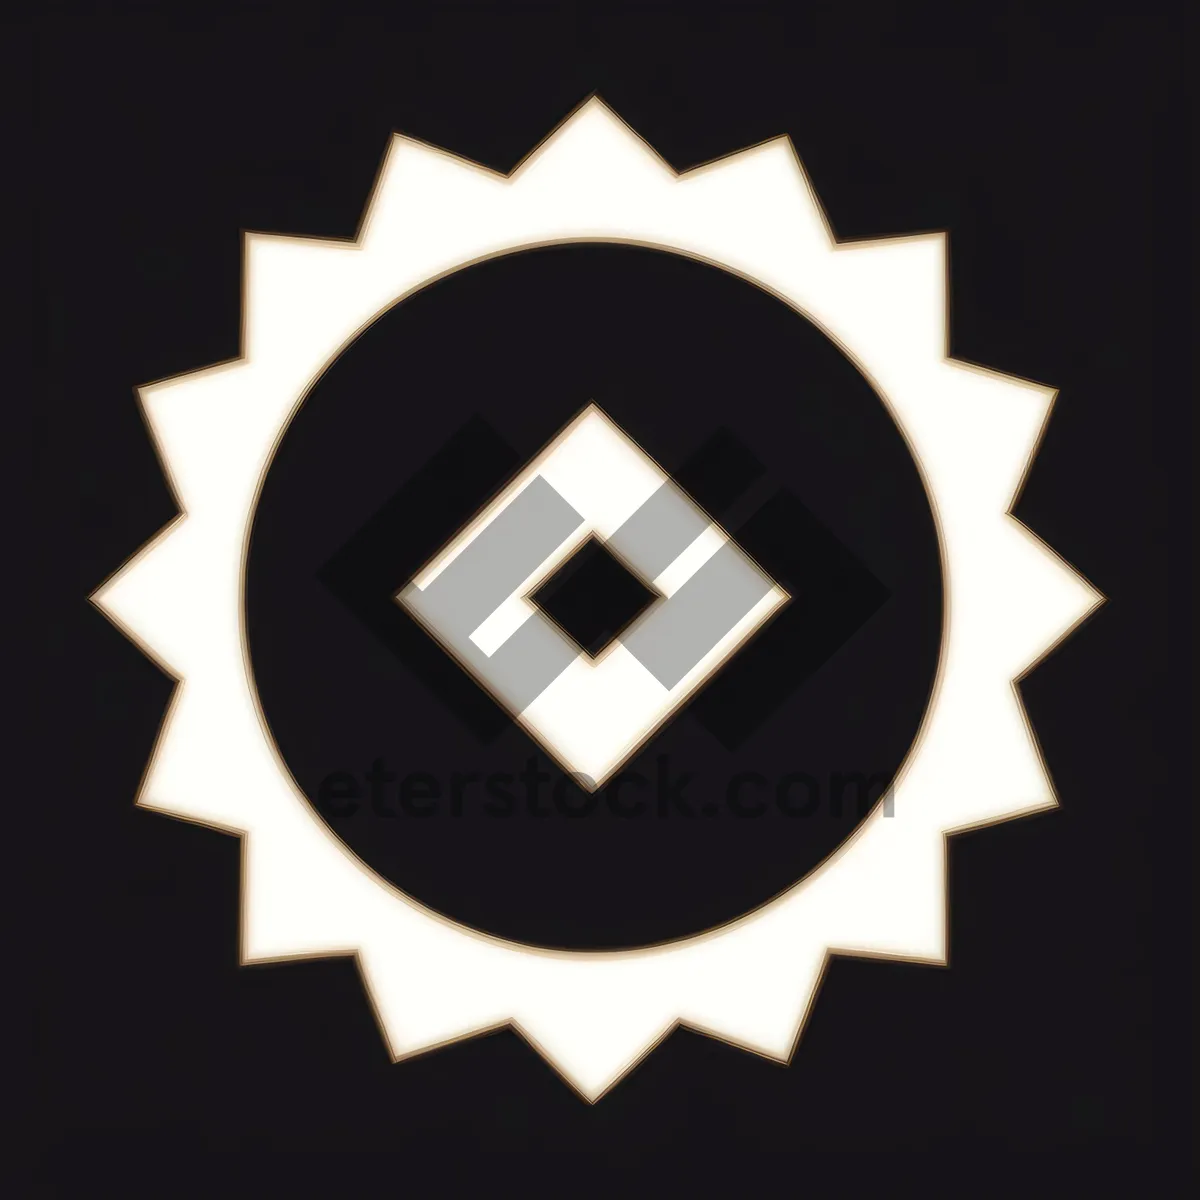 Picture of Symbolic Gear Design Badge - Iconic Circle Sticker Element.